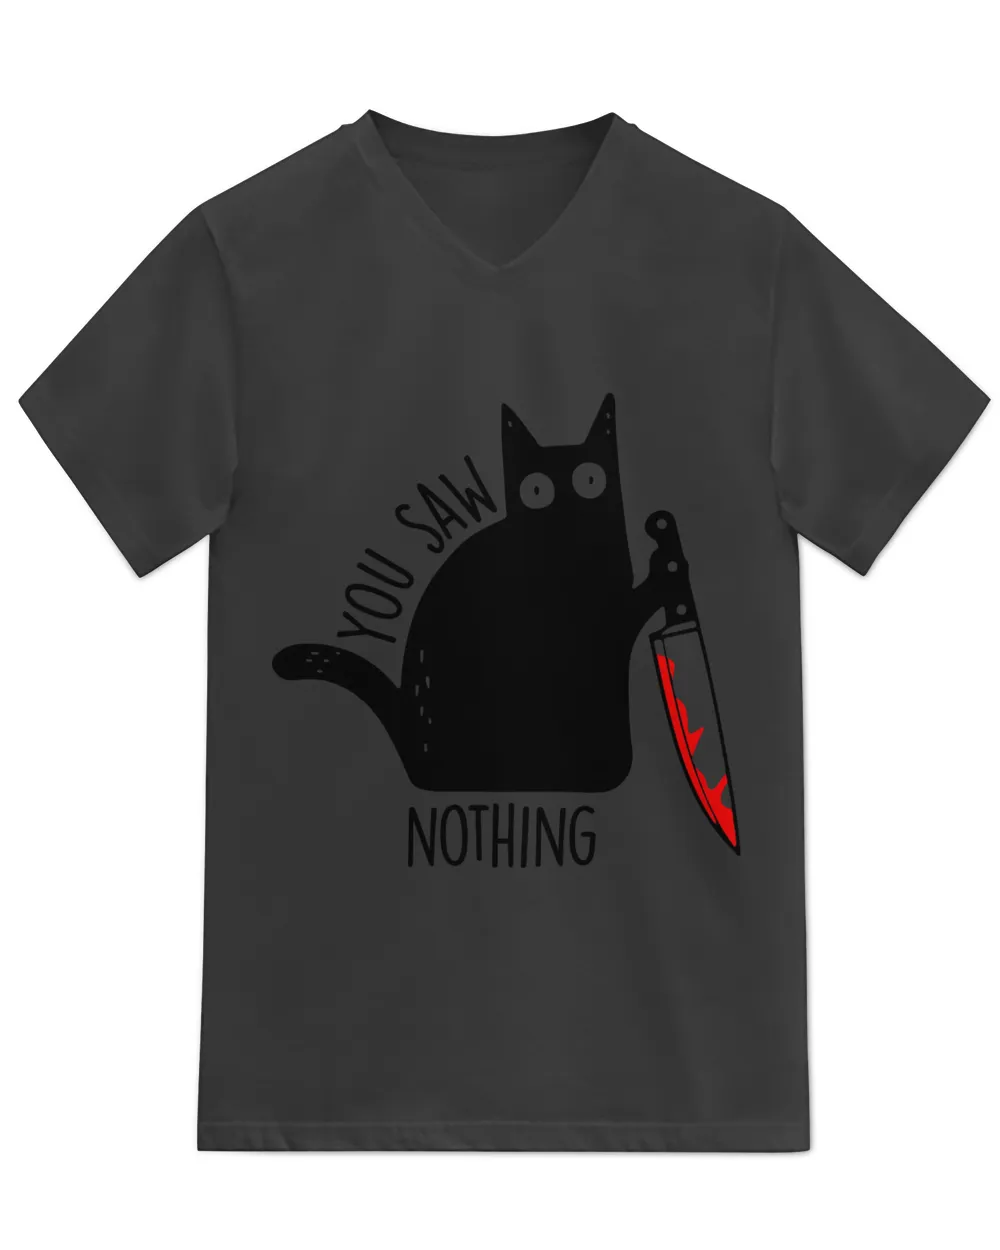 Funny Cat Shirts You Saw Nothing, Funny Black Cat Gifts idea-01-01-01-01-01-01